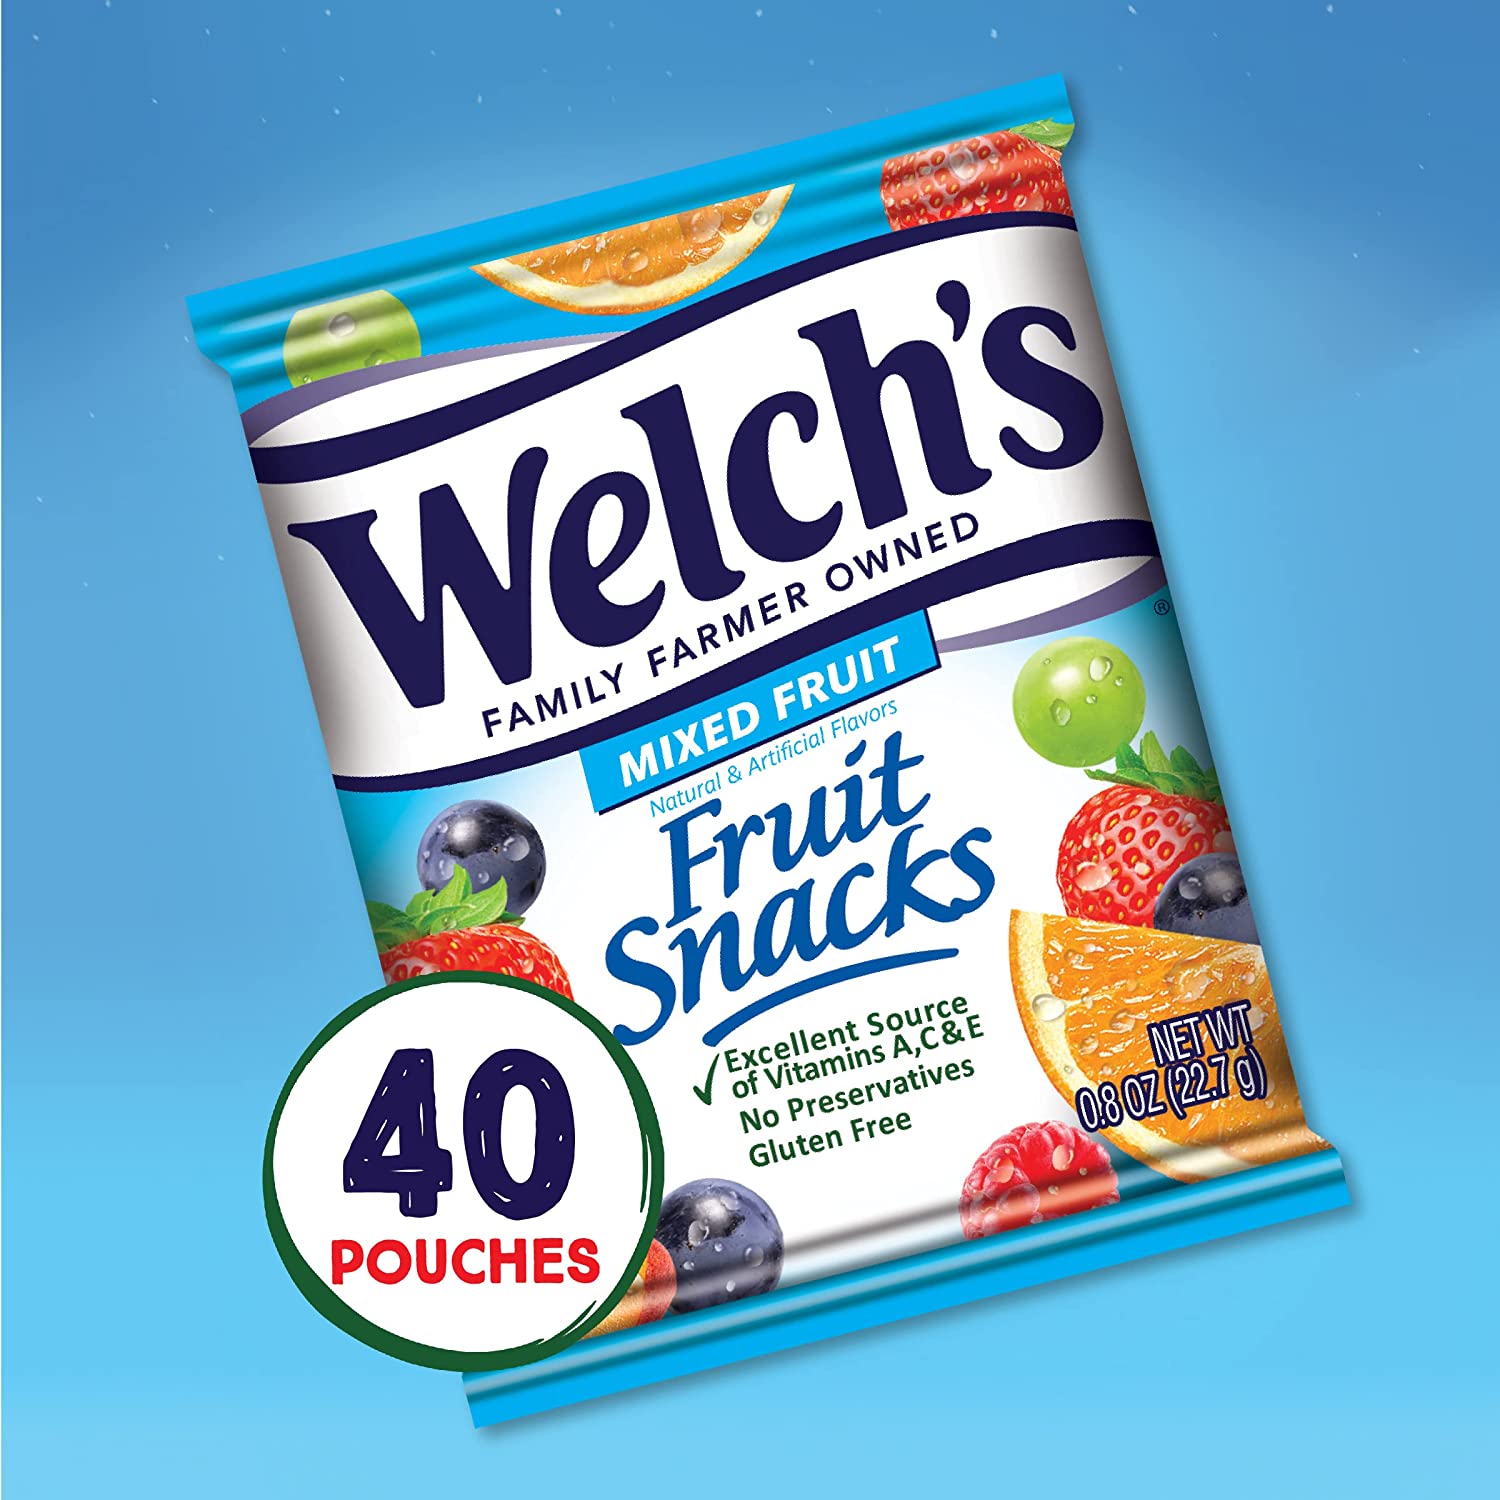 Welch's Fruit Snacks, Mixed Fruit, Gluten Free, Bulk Pack, Individual Single Serve Bags, 0.8 oz (Pack of 40)